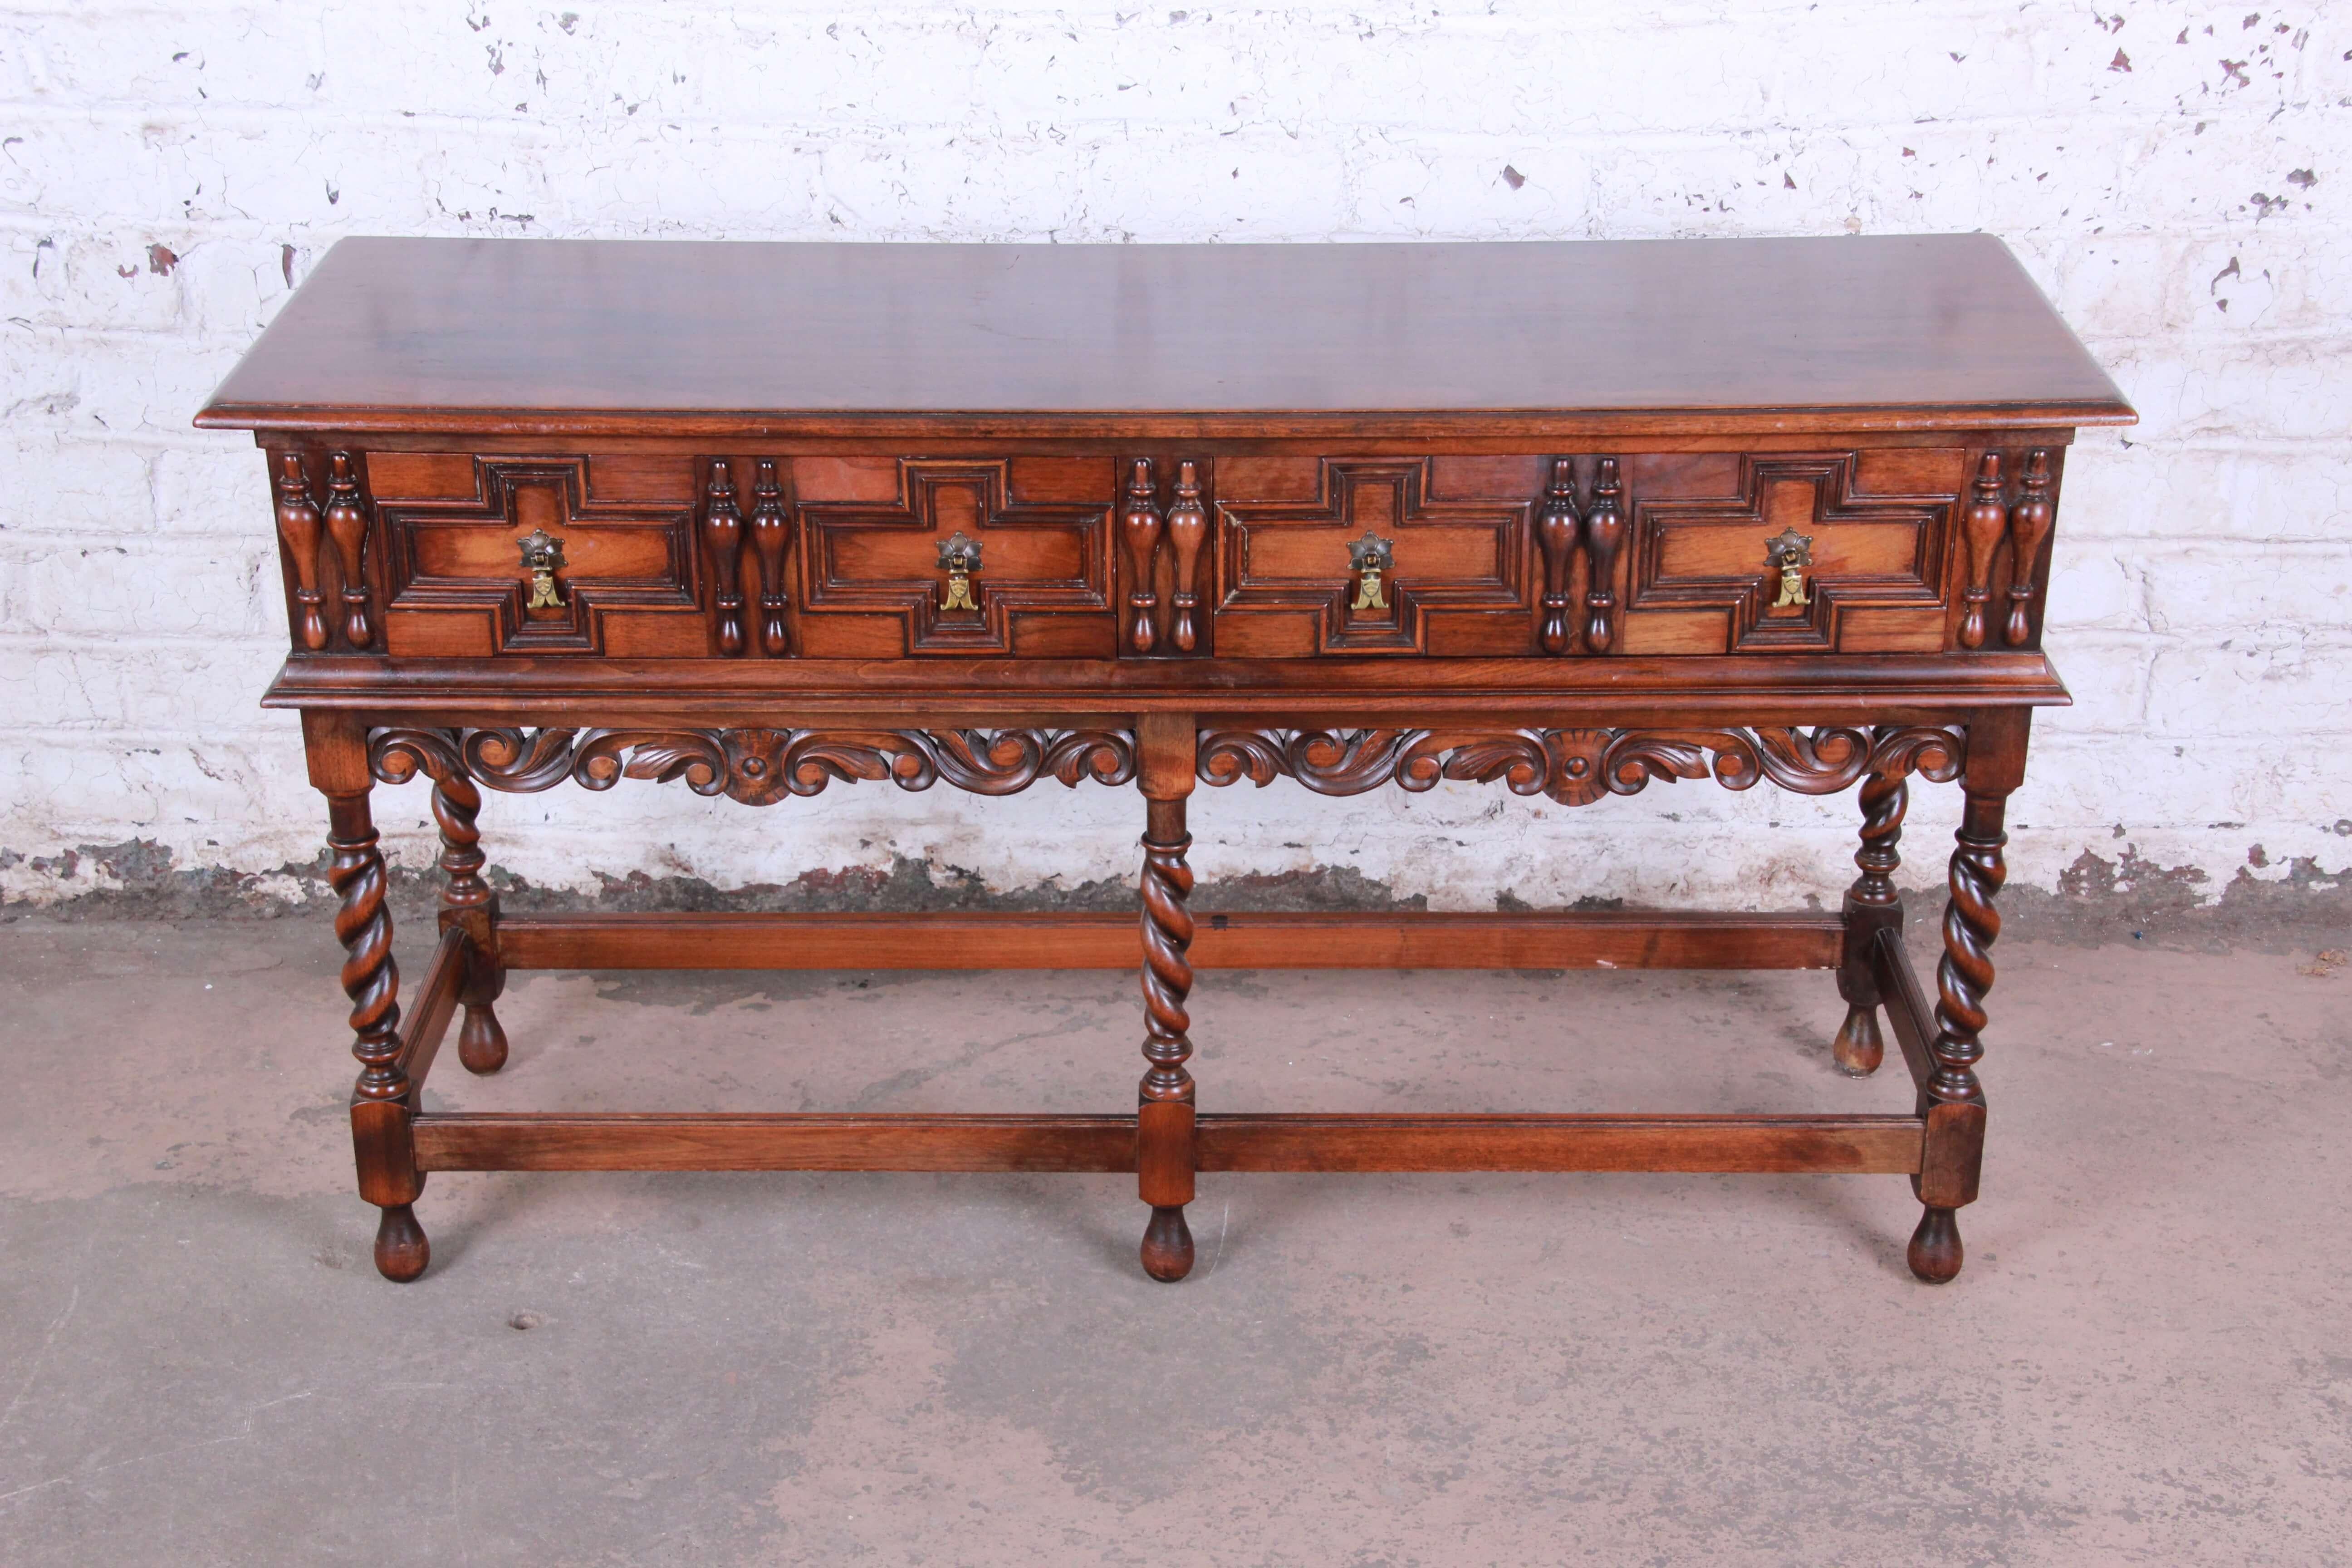 Offering a very nice antique Kittinger carved walnut sideboard buffet or bar server. The piece has detailed ornate carvings with English barley twist legs. There are two large drawers with interiors being solid oak which open and close smoothly. The